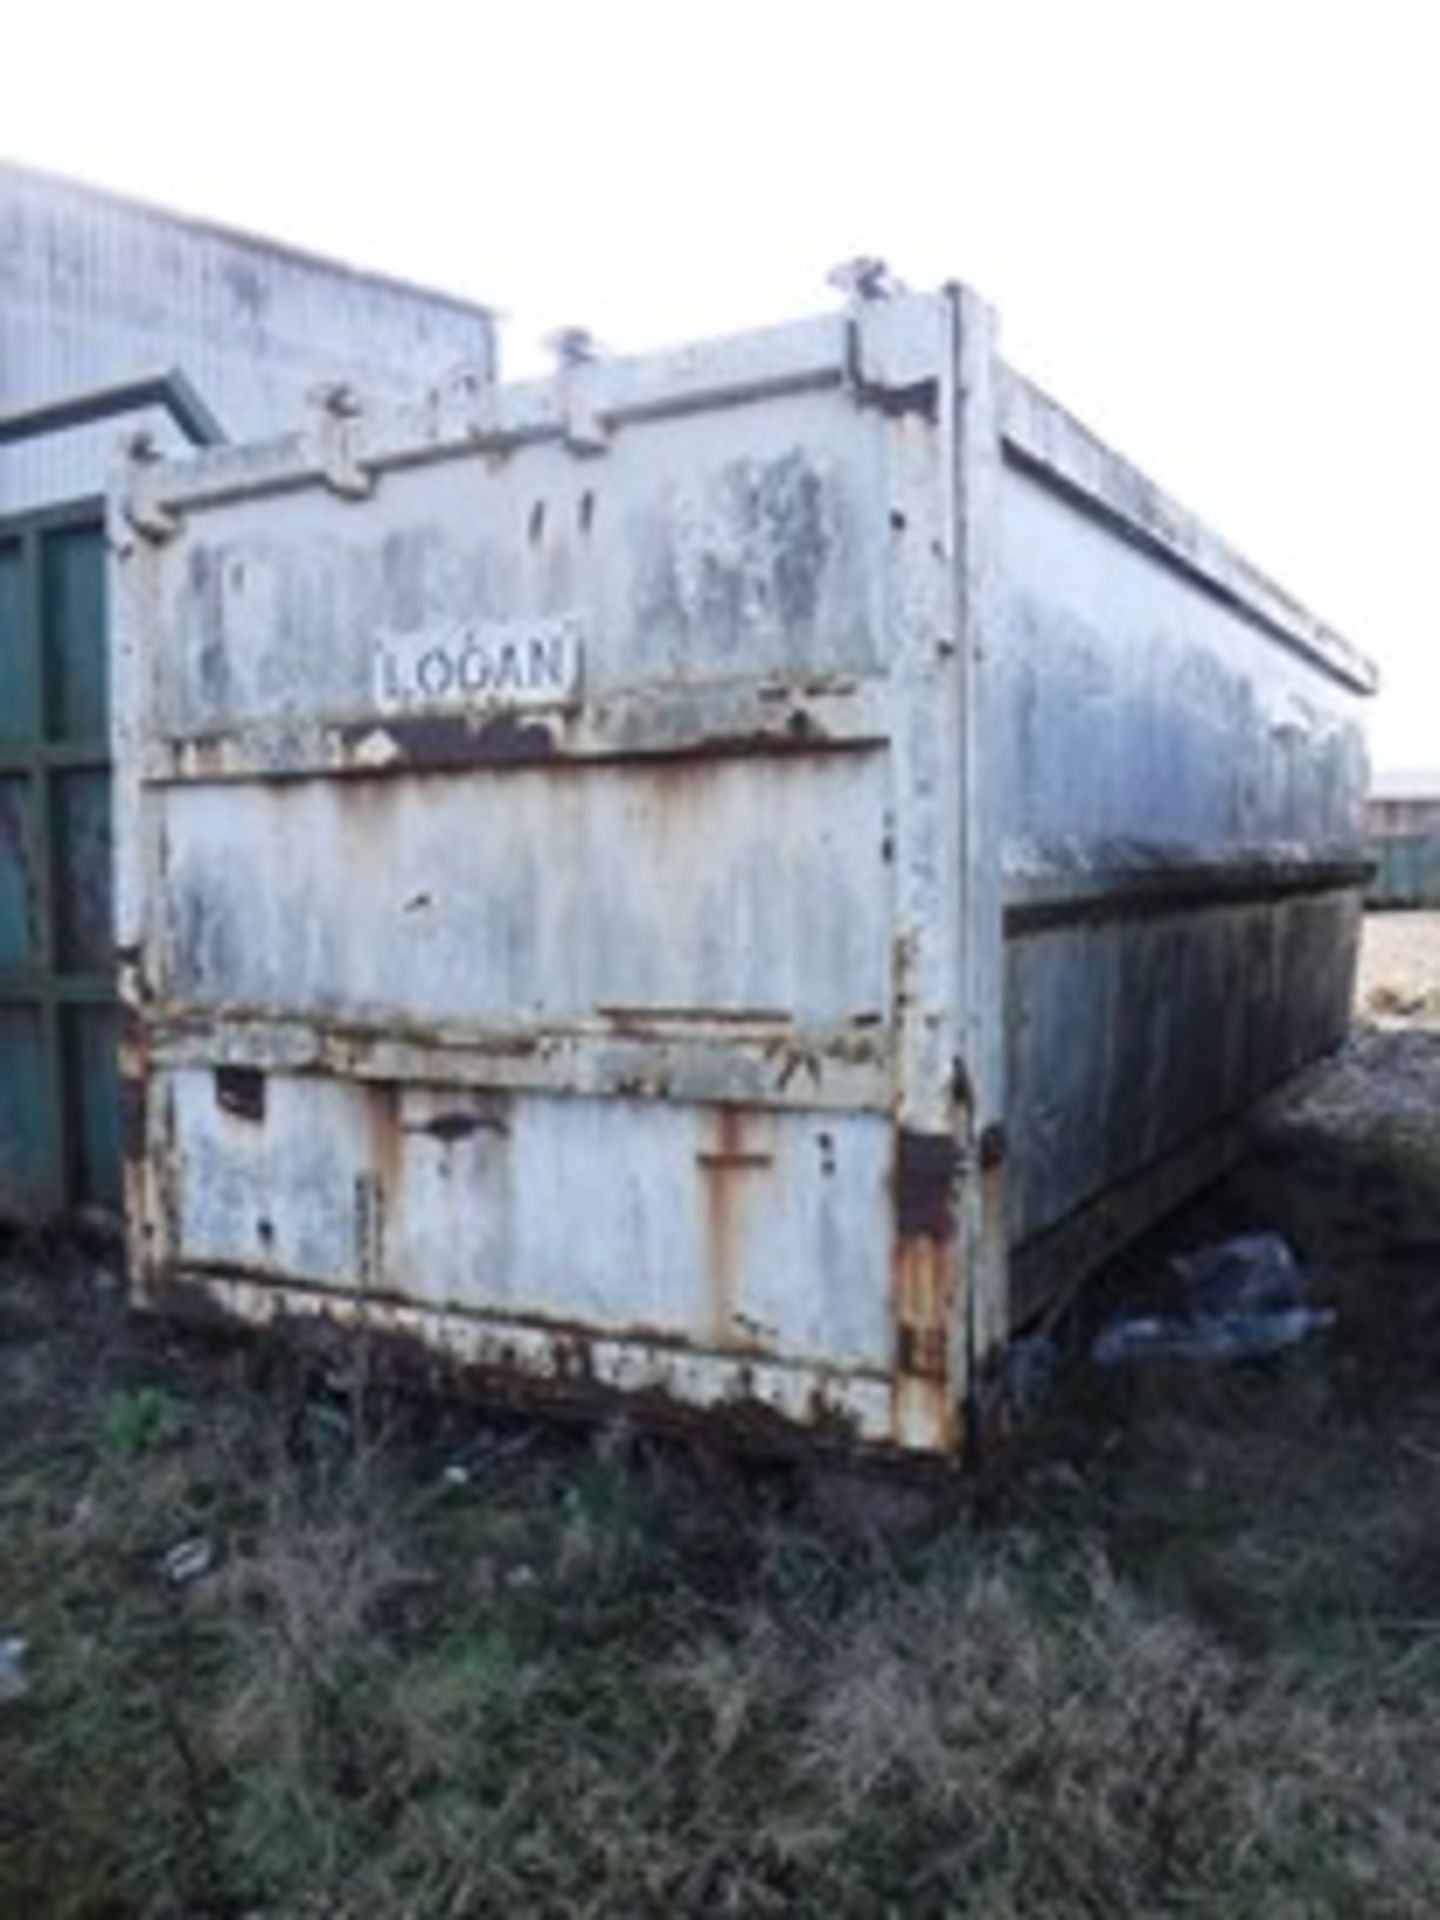 OPEN TOP SKIP.REAR DOOR HINGED AT TOP.ACCESS LADDER AT FRONT W2500 L6100 H2500. SLIGHT SURFACE RUST. - Image 2 of 2